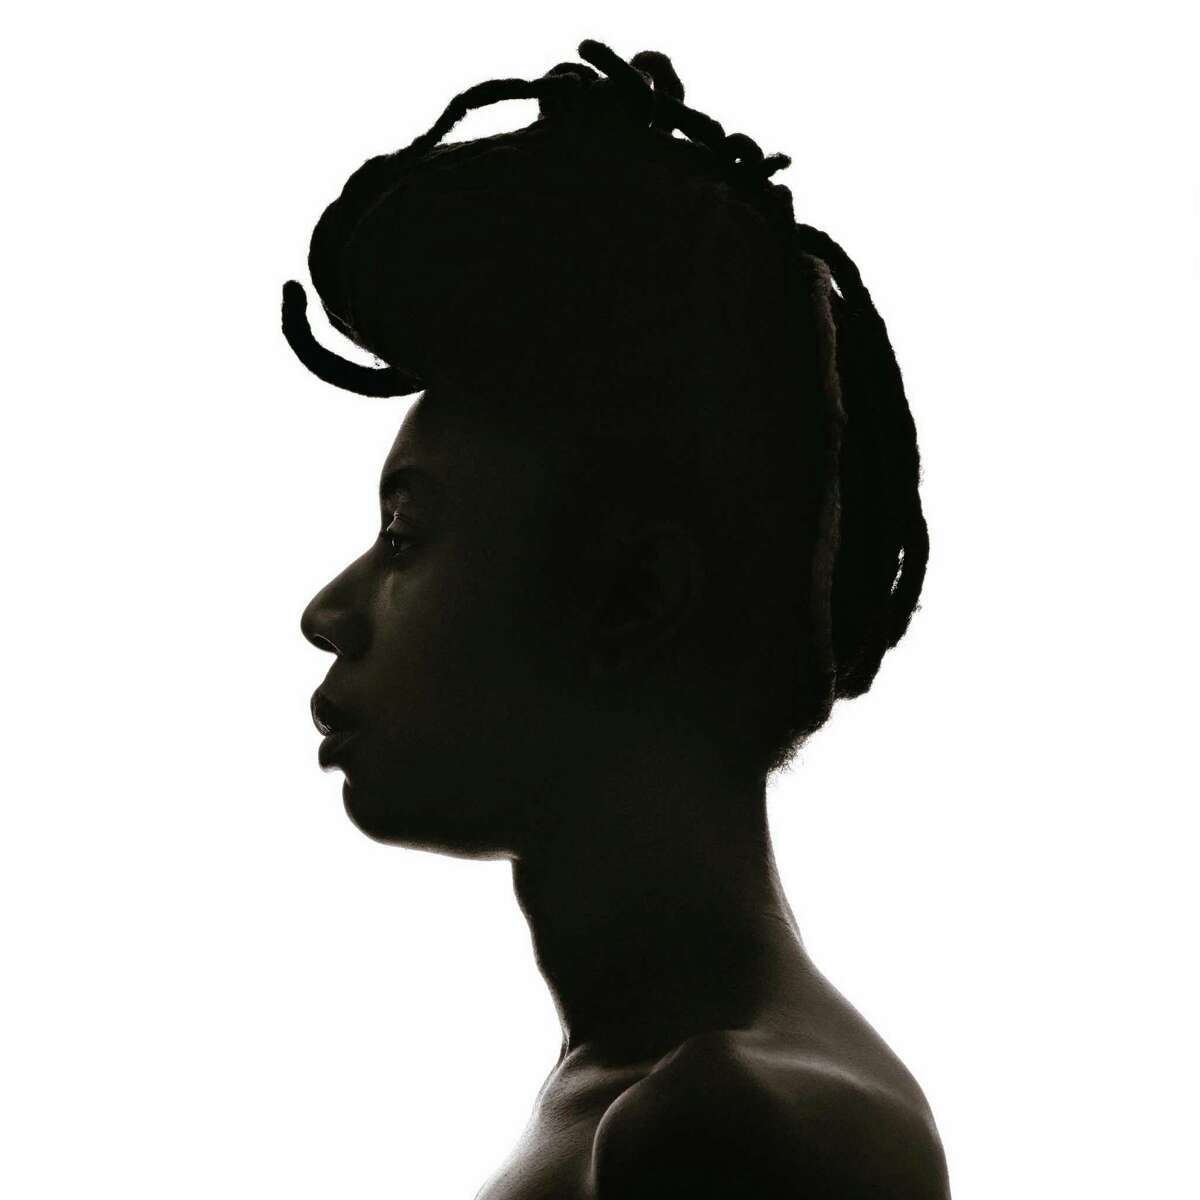 Deeman experimented with backlighting to create her silhouette portraits.